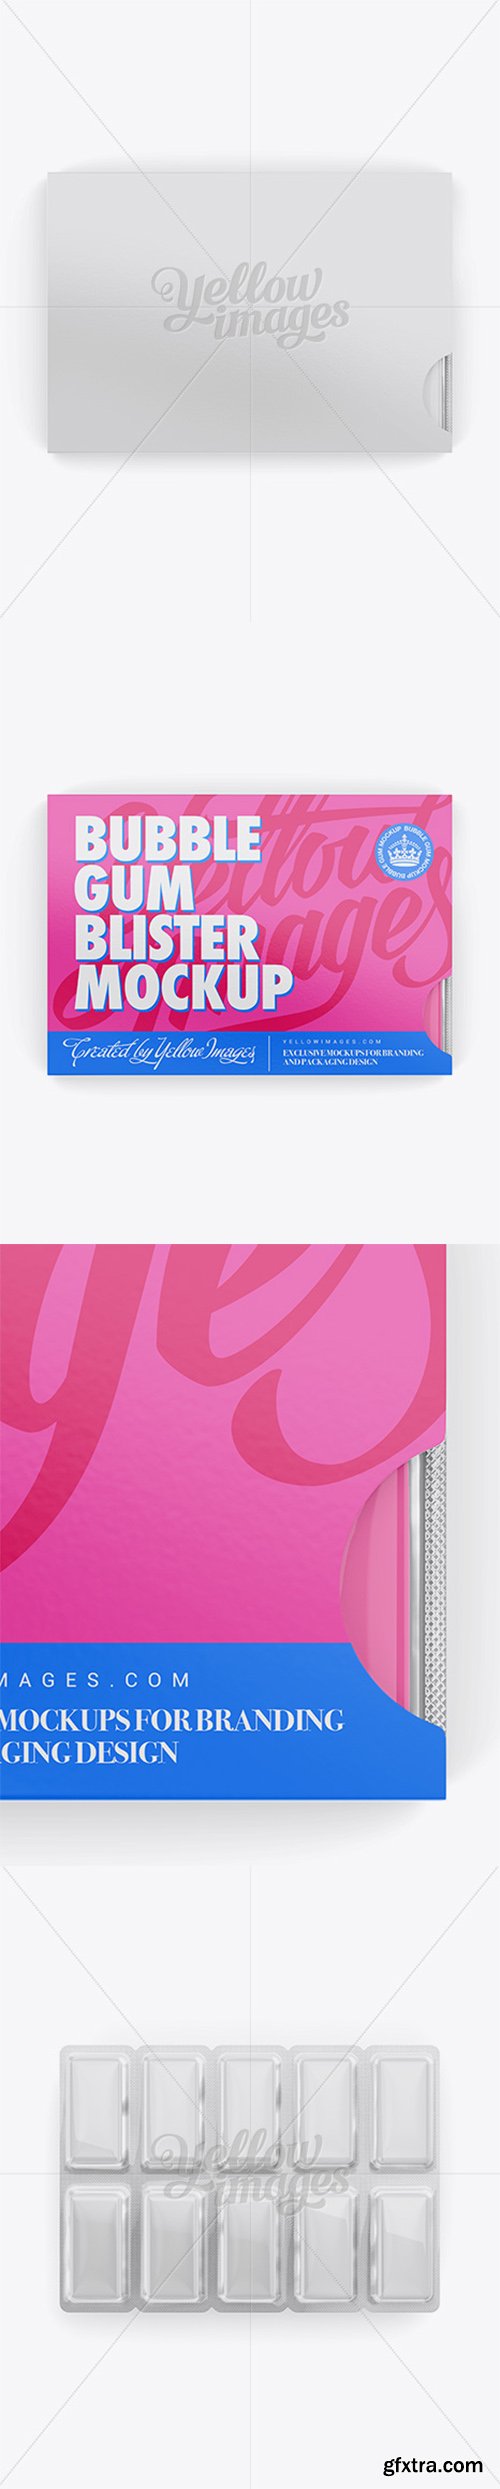 Chewing Gum Blister Package Mockup - Top View 13296